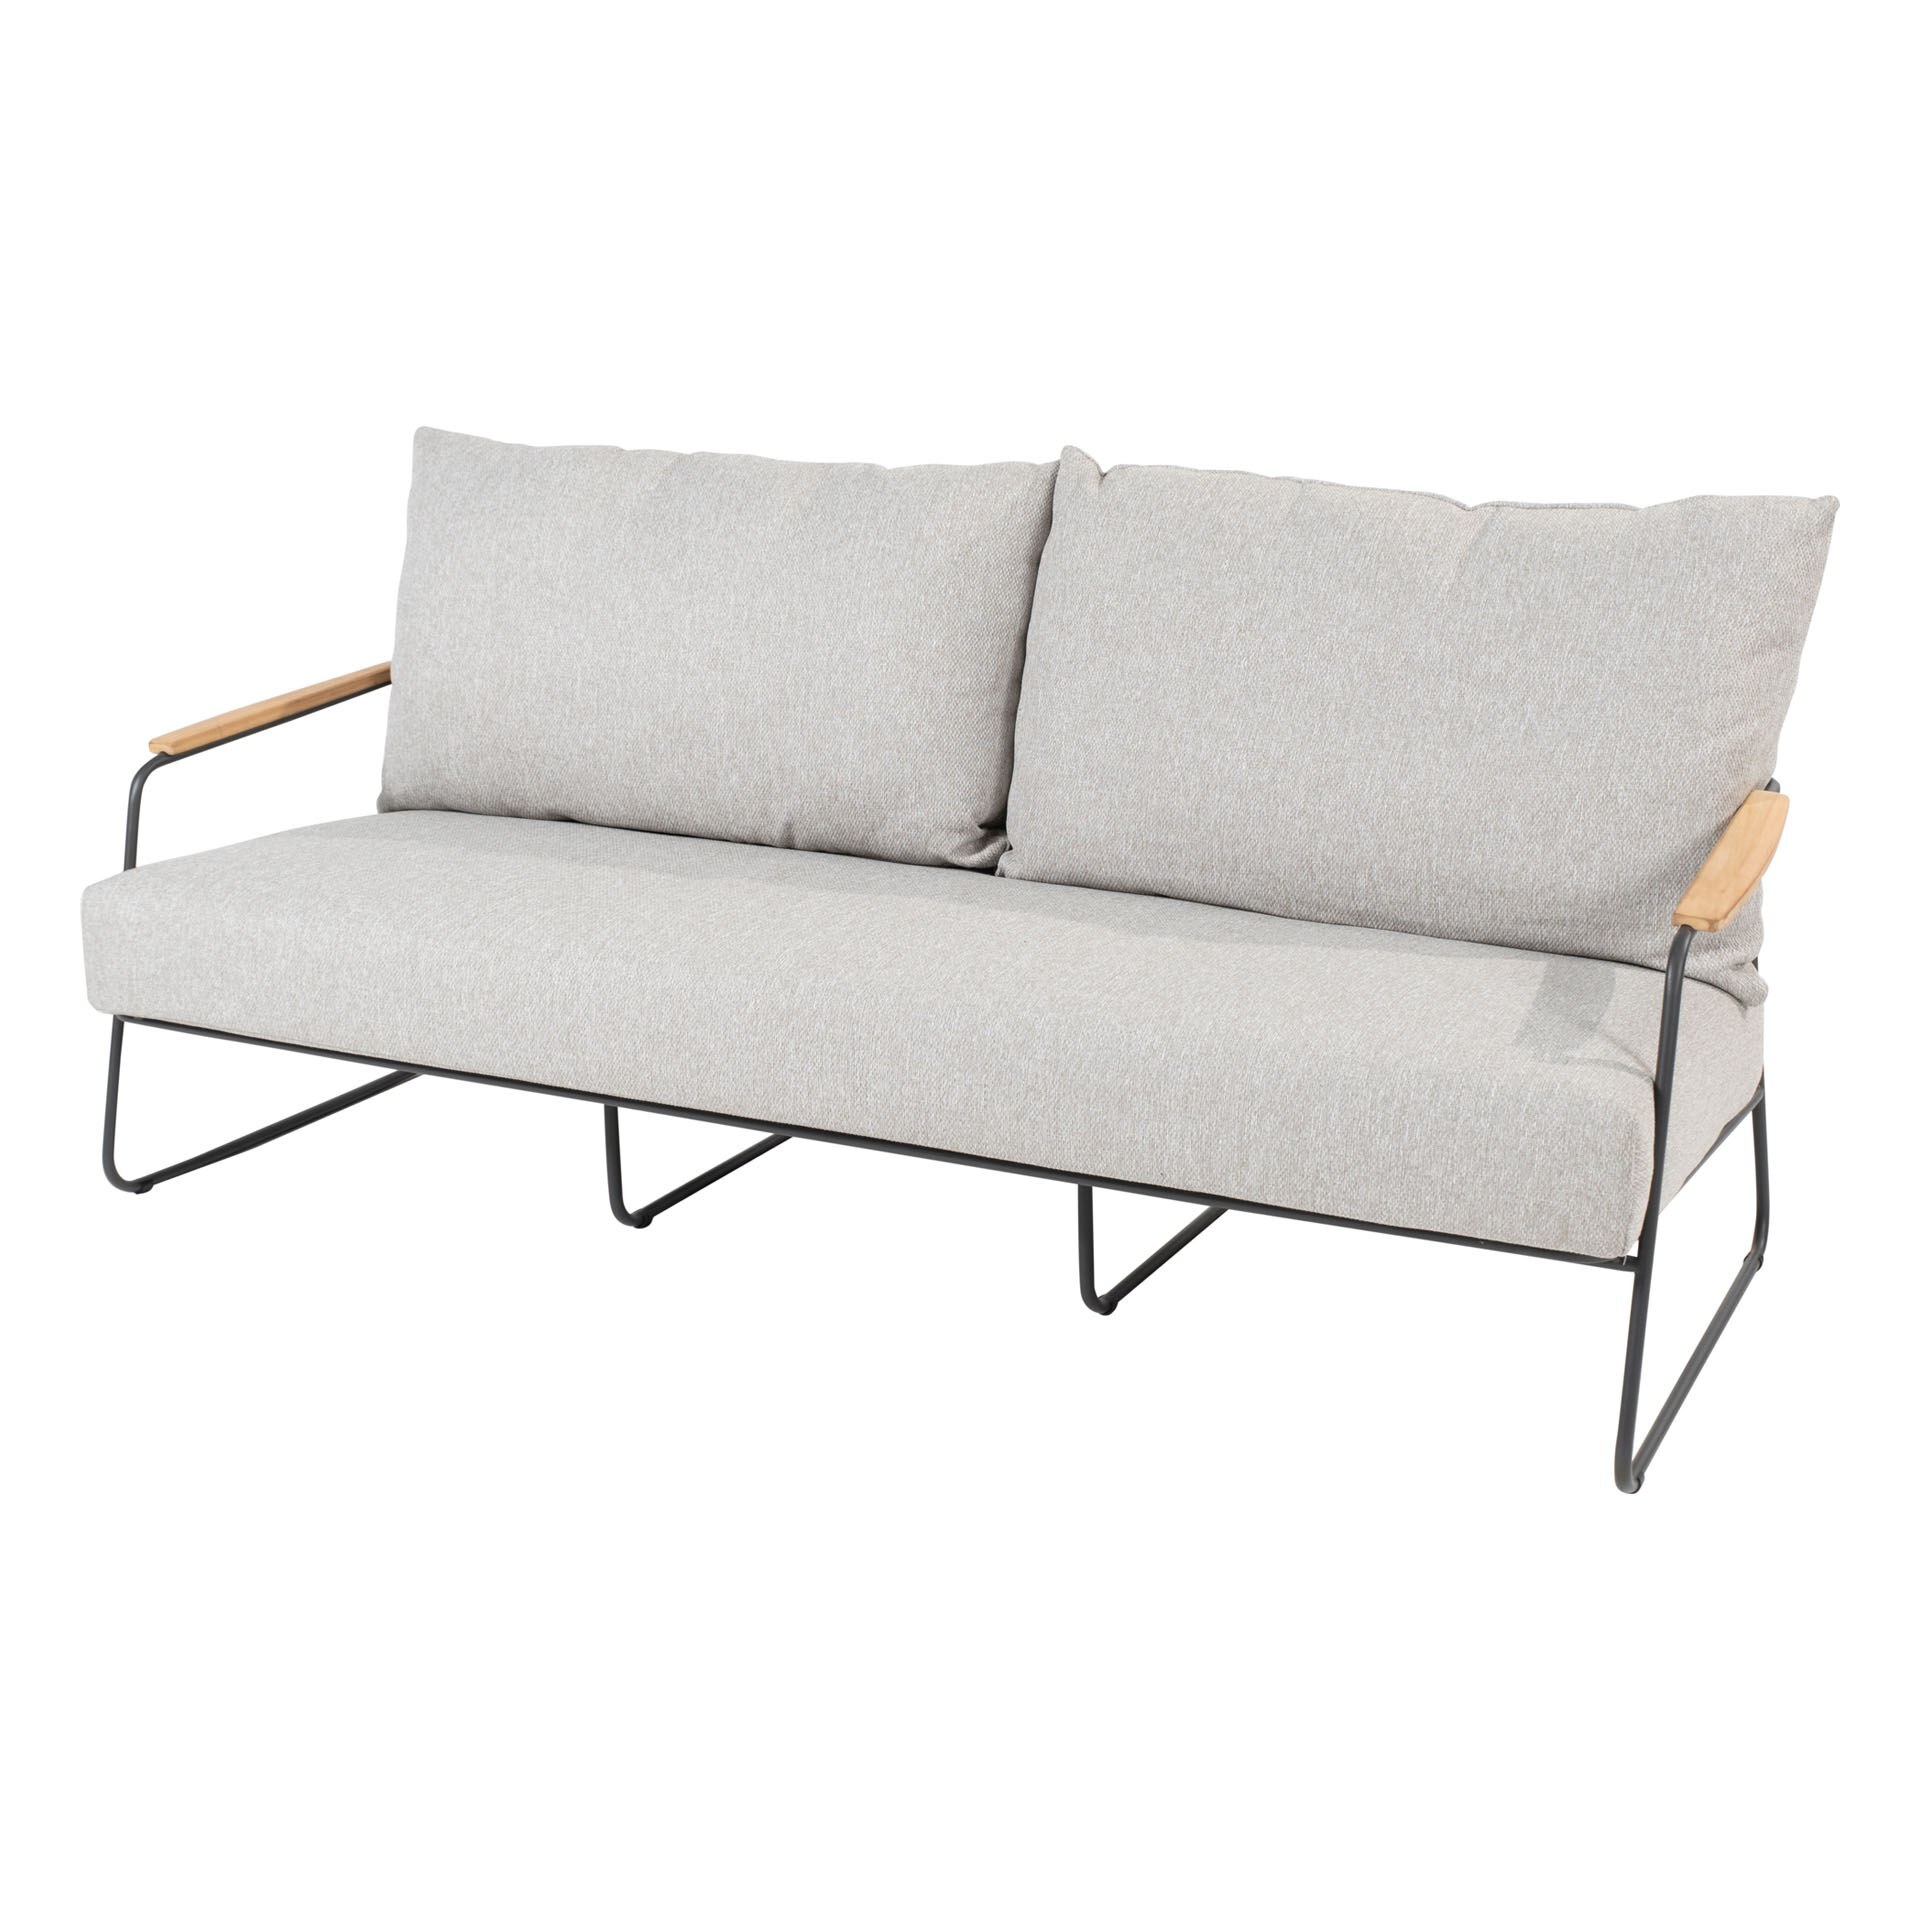 Balade Living Bench with 3 cushions 